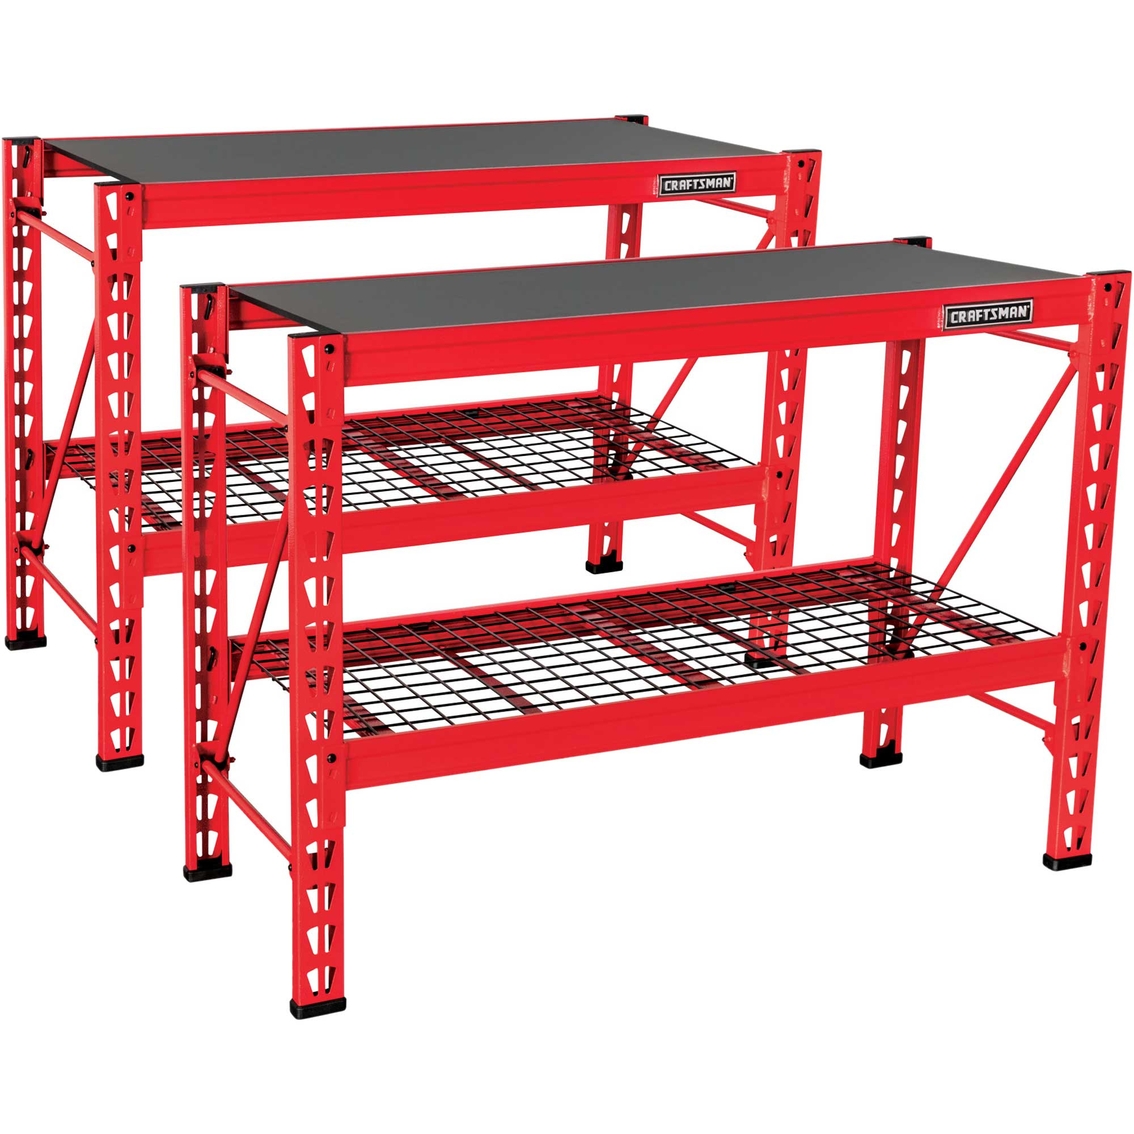 Craftsman 2-Shelf 3 ft. Tall Stackable Tool Chest Depth Storage Rack, 2 pk. - Image 1 of 10